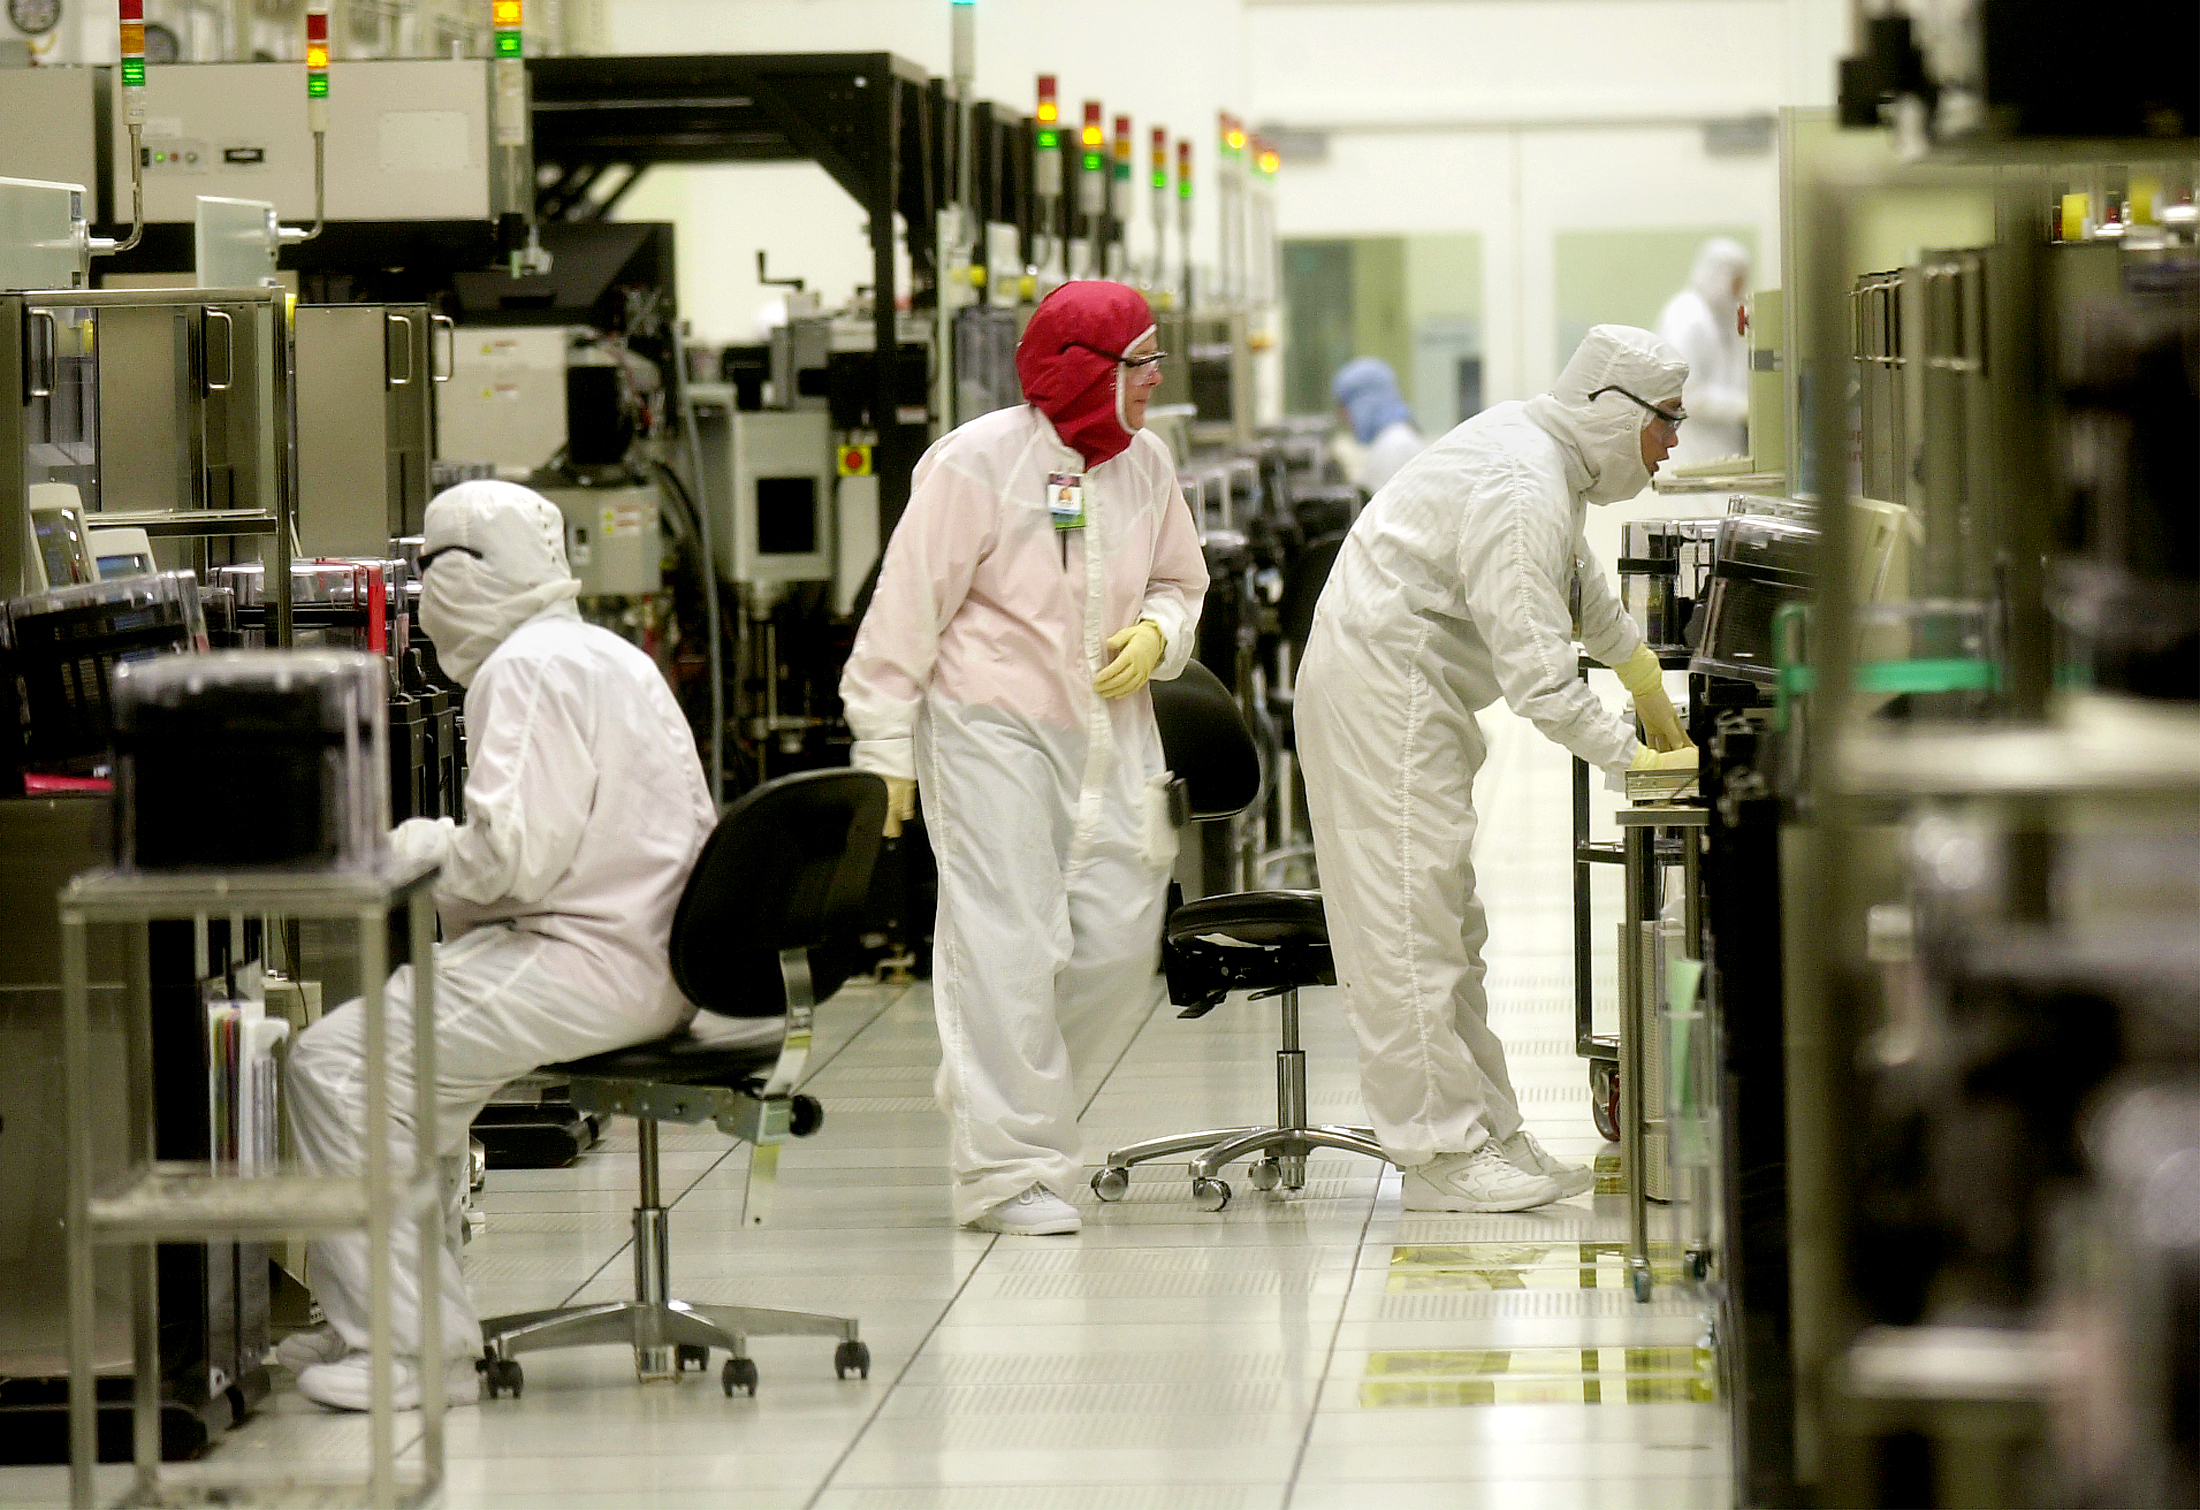 TSMC, which oversees WaferTech in Camas, could be eligible to receive the funds under the CHIPS Act. The company is planning to expand its U.S. presence — but not in Camas. Last May, TSMC’s board of directors approved creating a subsidiary in Arizona.